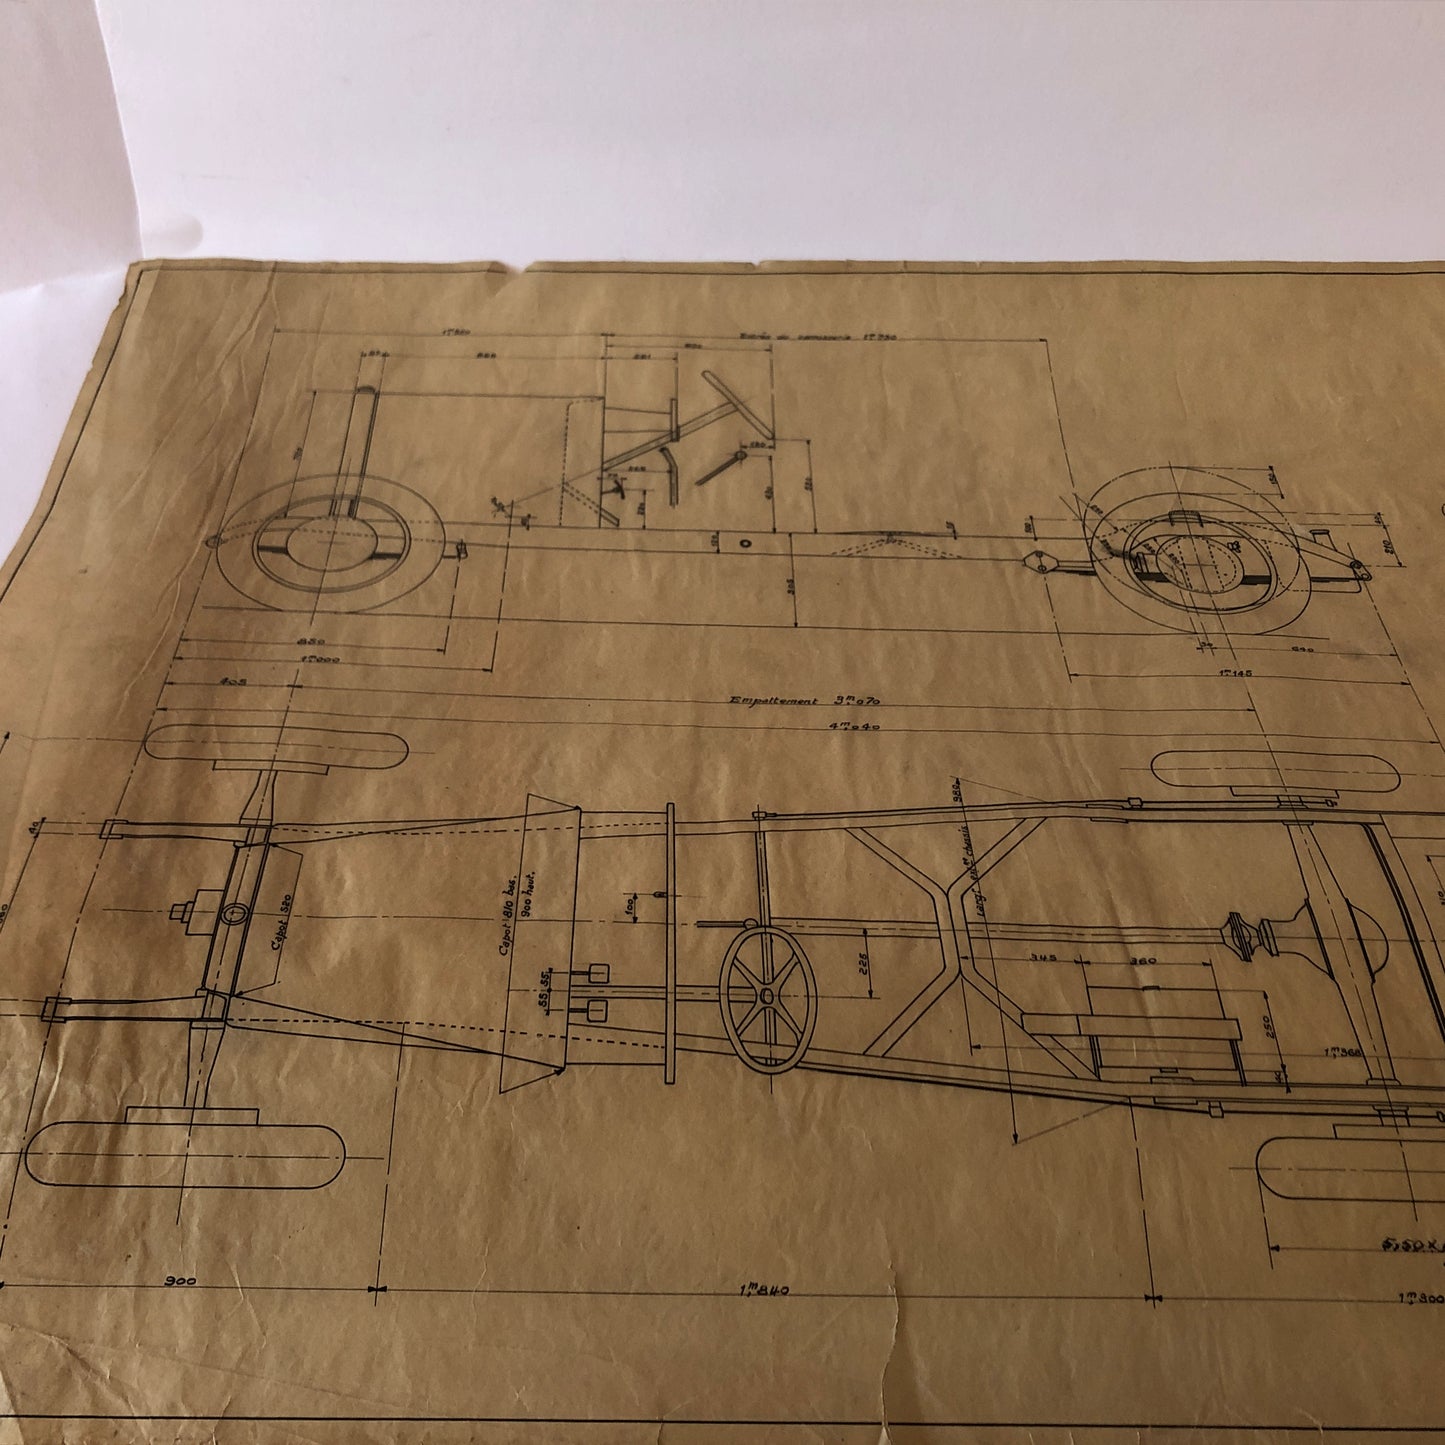 Jean Gras, Technical Drawing Chassis Type A9D - Dyona 1933 - Jean Gras Six